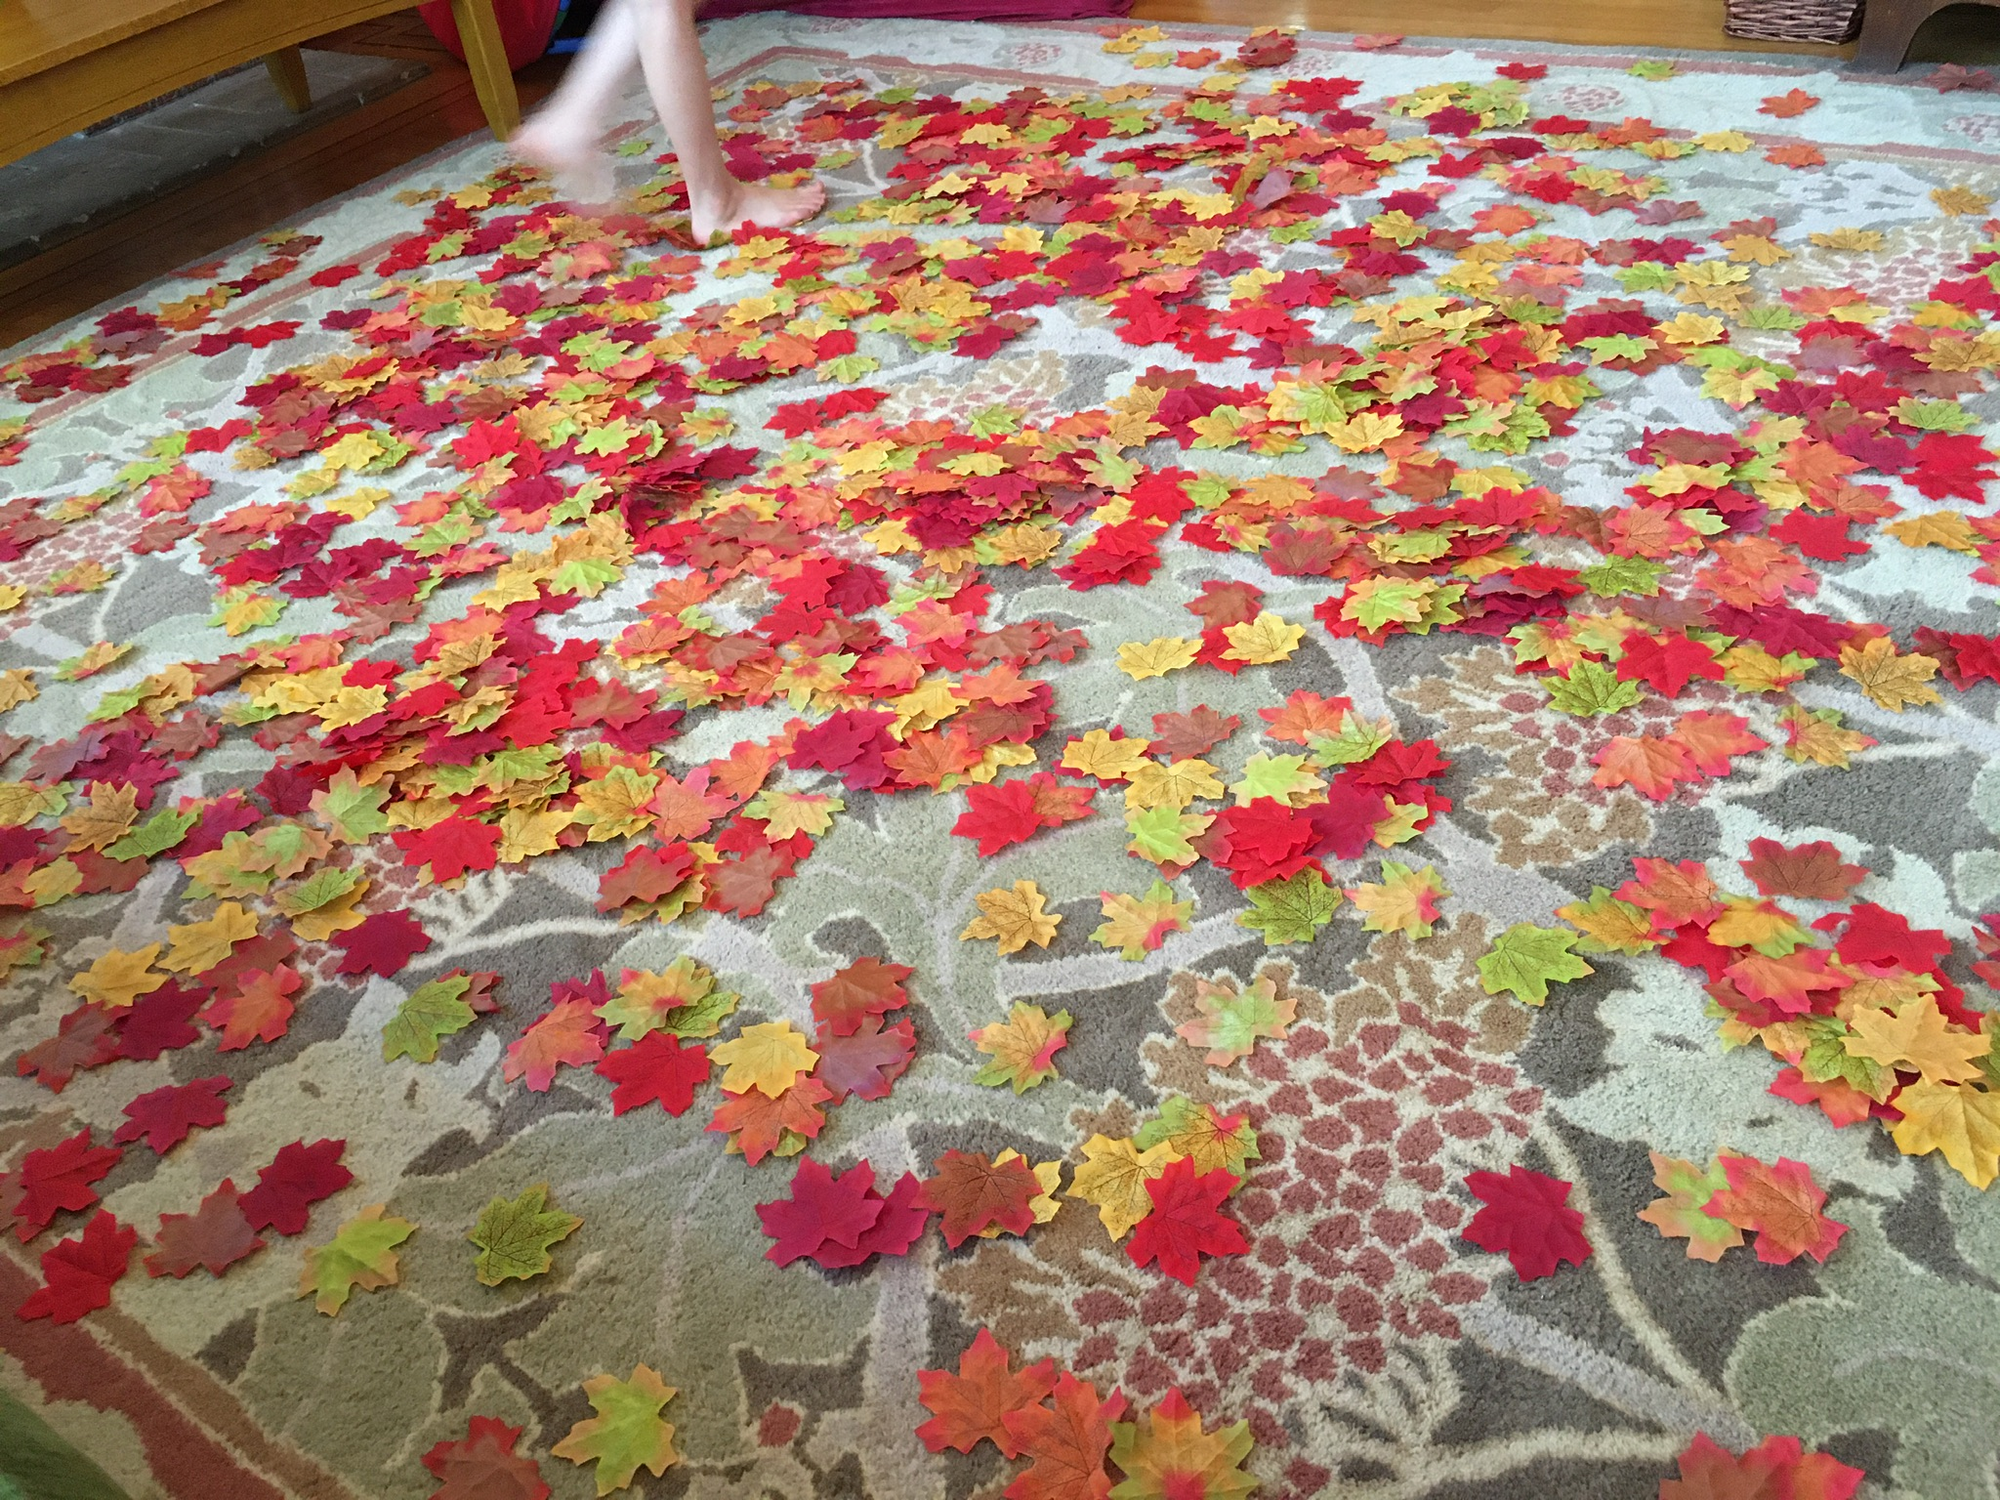 Fake fall maple leaves made of fabric in red, orange, yellow, green, and brown, strewn across our living room floor.